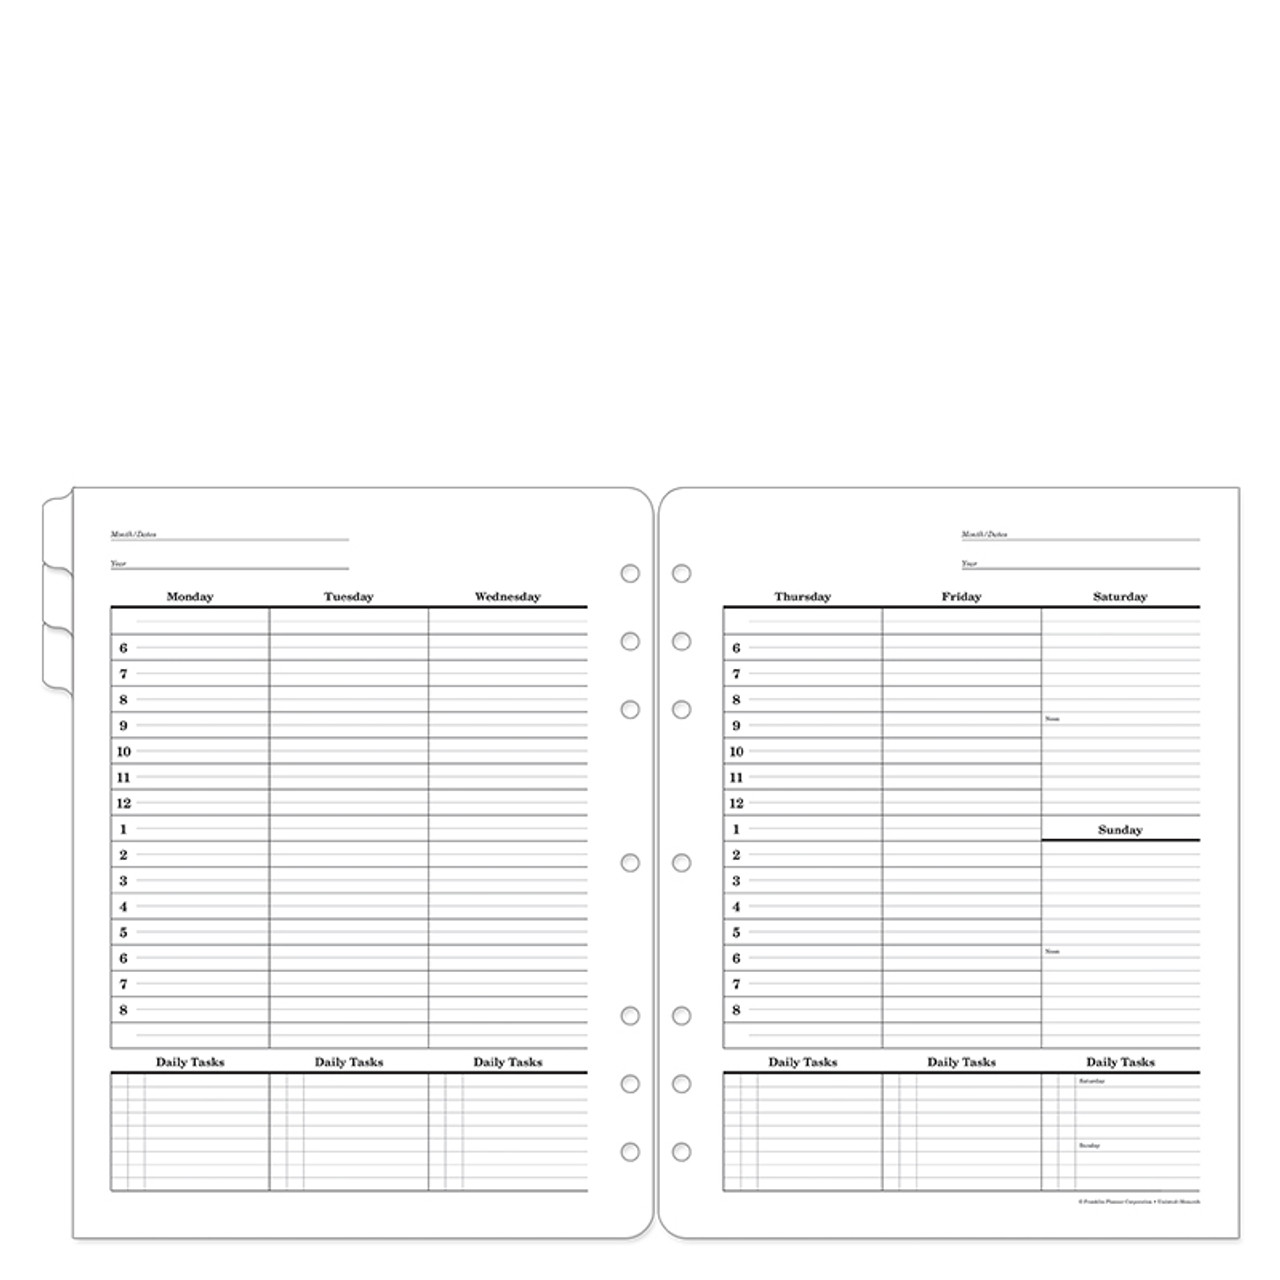 Mead Planner 47026 Refill Undated Block Notes 30 Sheets Franklin